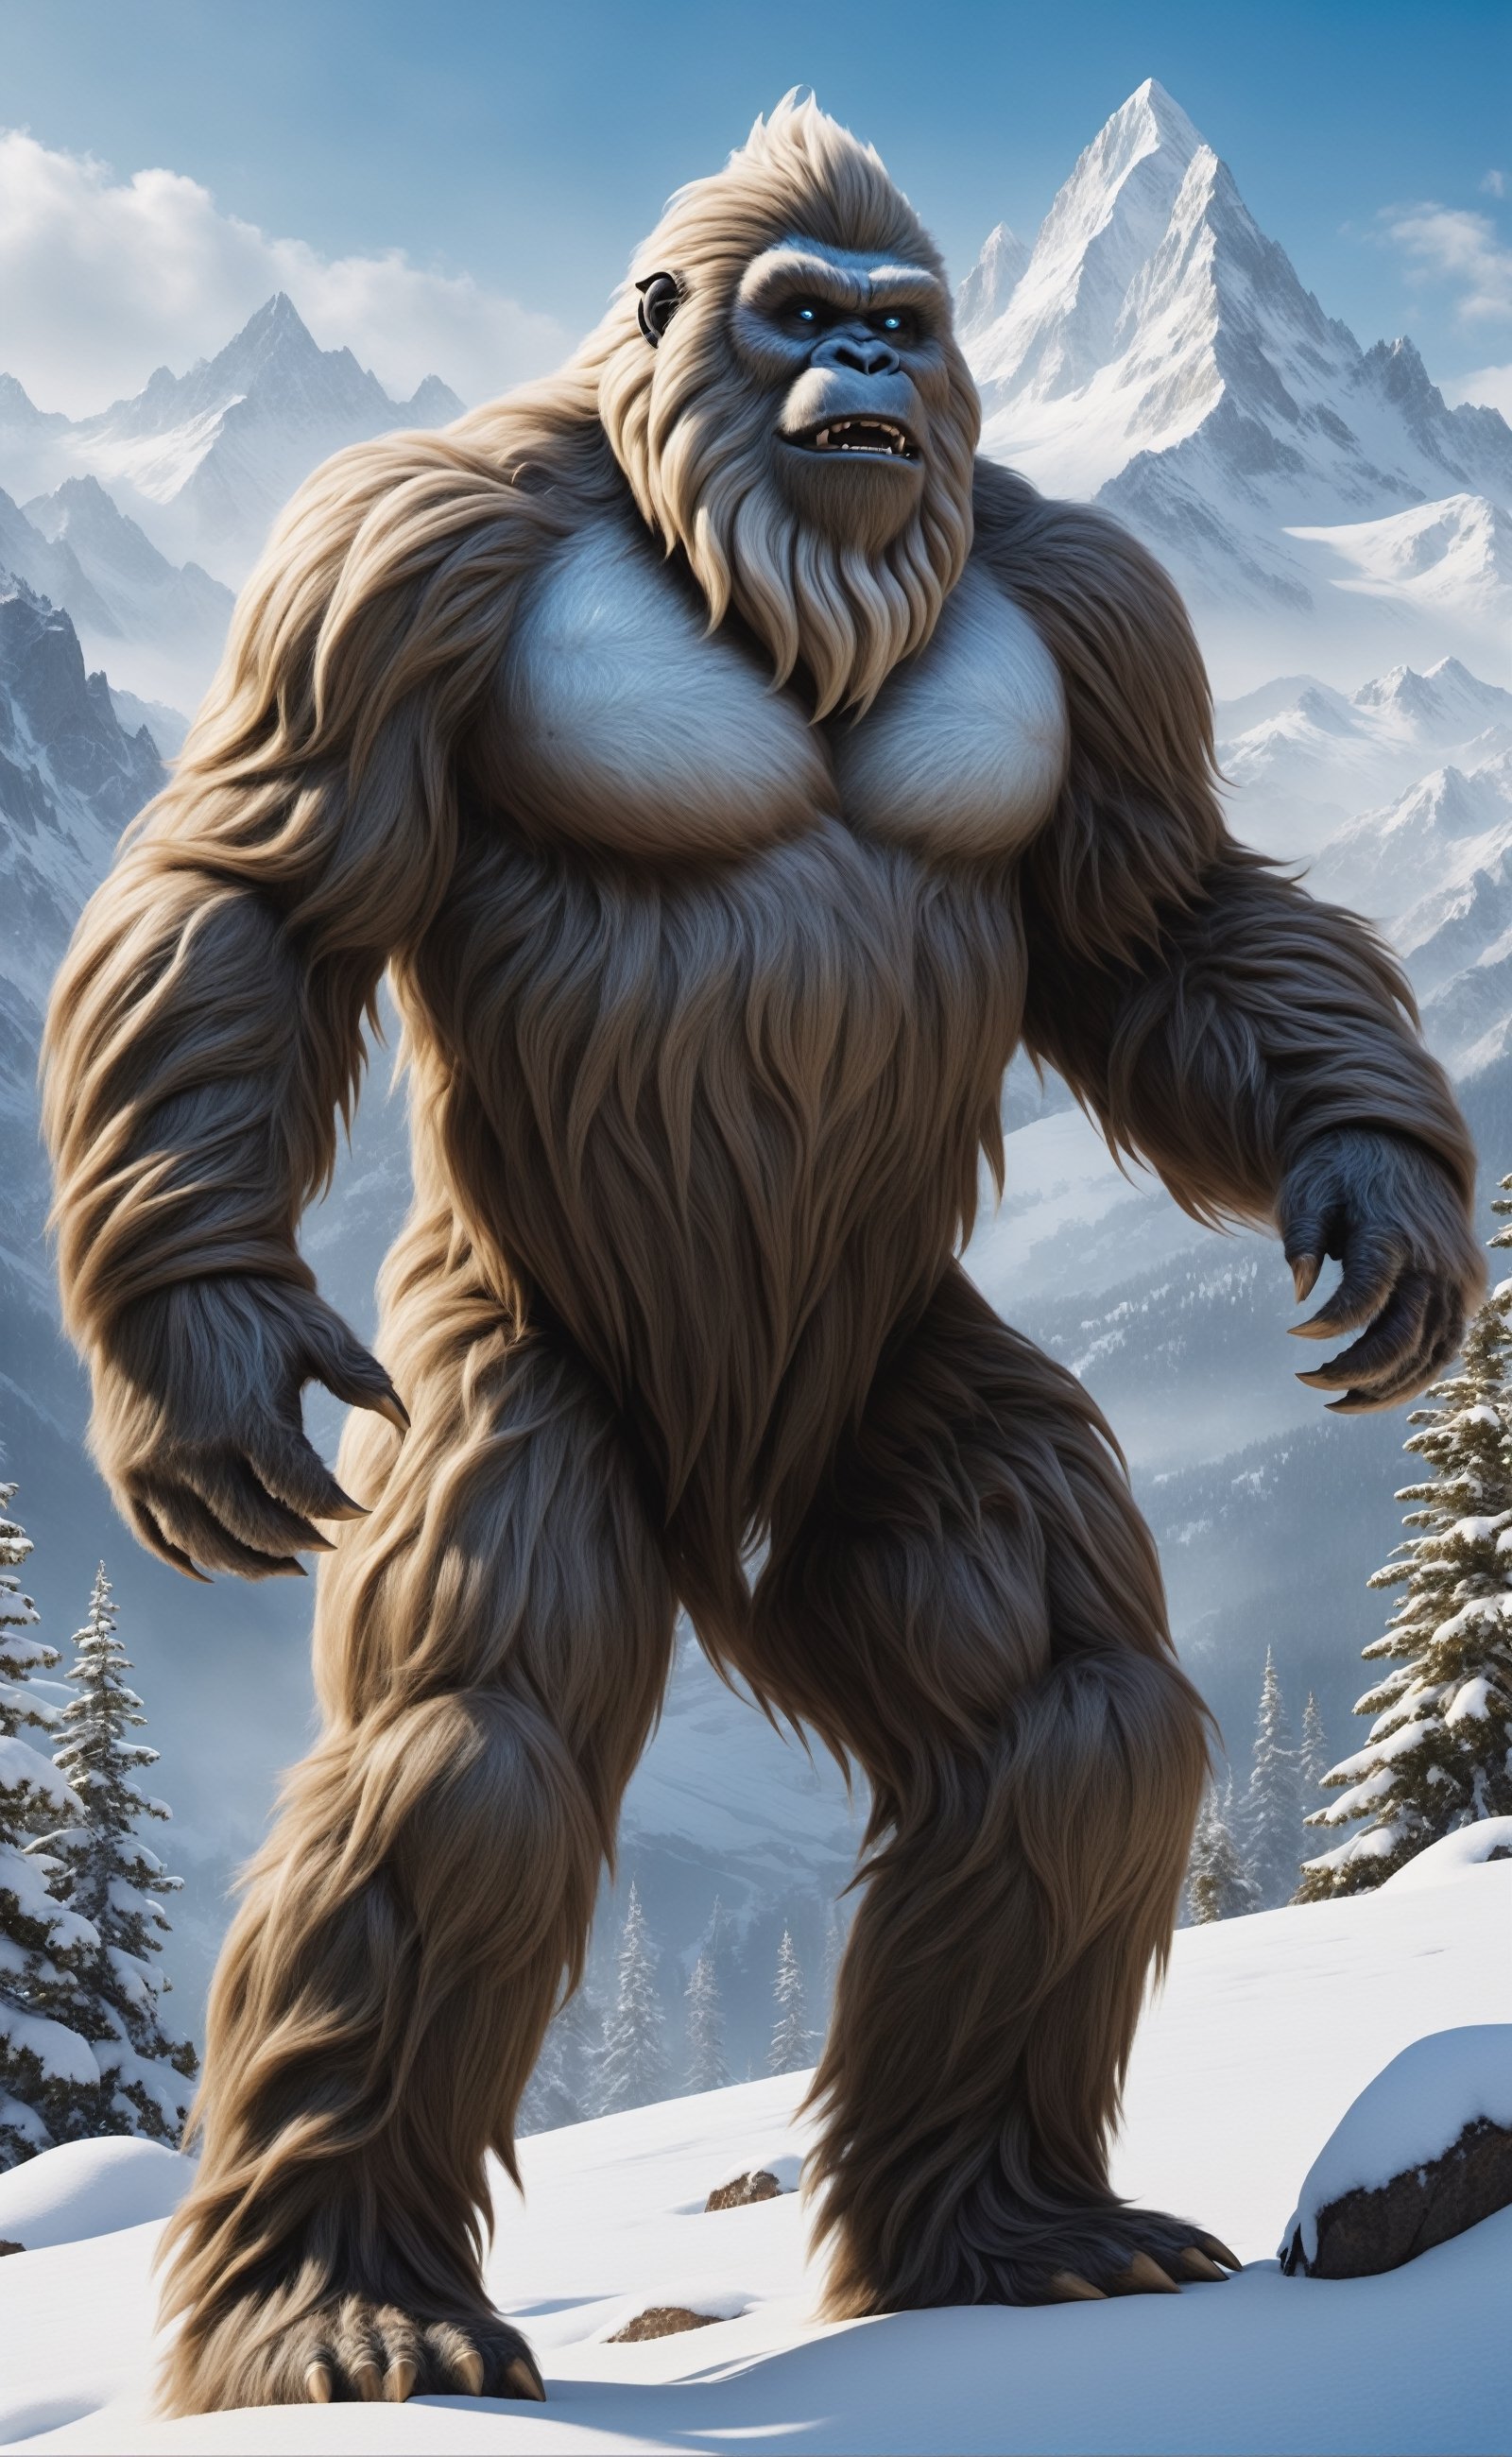 Amidst the towering peaks of a majestic mountain range, a photorealistic depiction of the mythical creature known as the Yeti comes to life. Against a backdrop of pristine snow-covered slopes and craggy cliffs, the enigmatic beast stands upright, covered in a thick, frosty fur that perfectly camouflages it in its wintry habitat. The creature's powerful frame is defined by sinewy muscles beneath its fur, and its large, clawed feet leave deep imprints in the snow as it navigates the rugged terrain. The Yeti's face is characterized by piercing eyes that peer out from beneath a fur-covered brow, emanating an air of mystery and ancient wisdom. Wisps of icy breath escape its formidable jaws, creating a tangible sense of the frigid mountain air. This photorealistic portrayal captures the mythical Yeti in its natural alpine environment, a silent and elusive guardian of the snow-capped peaks, shrouded in the aura of legend and the quiet majesty of the mountains.